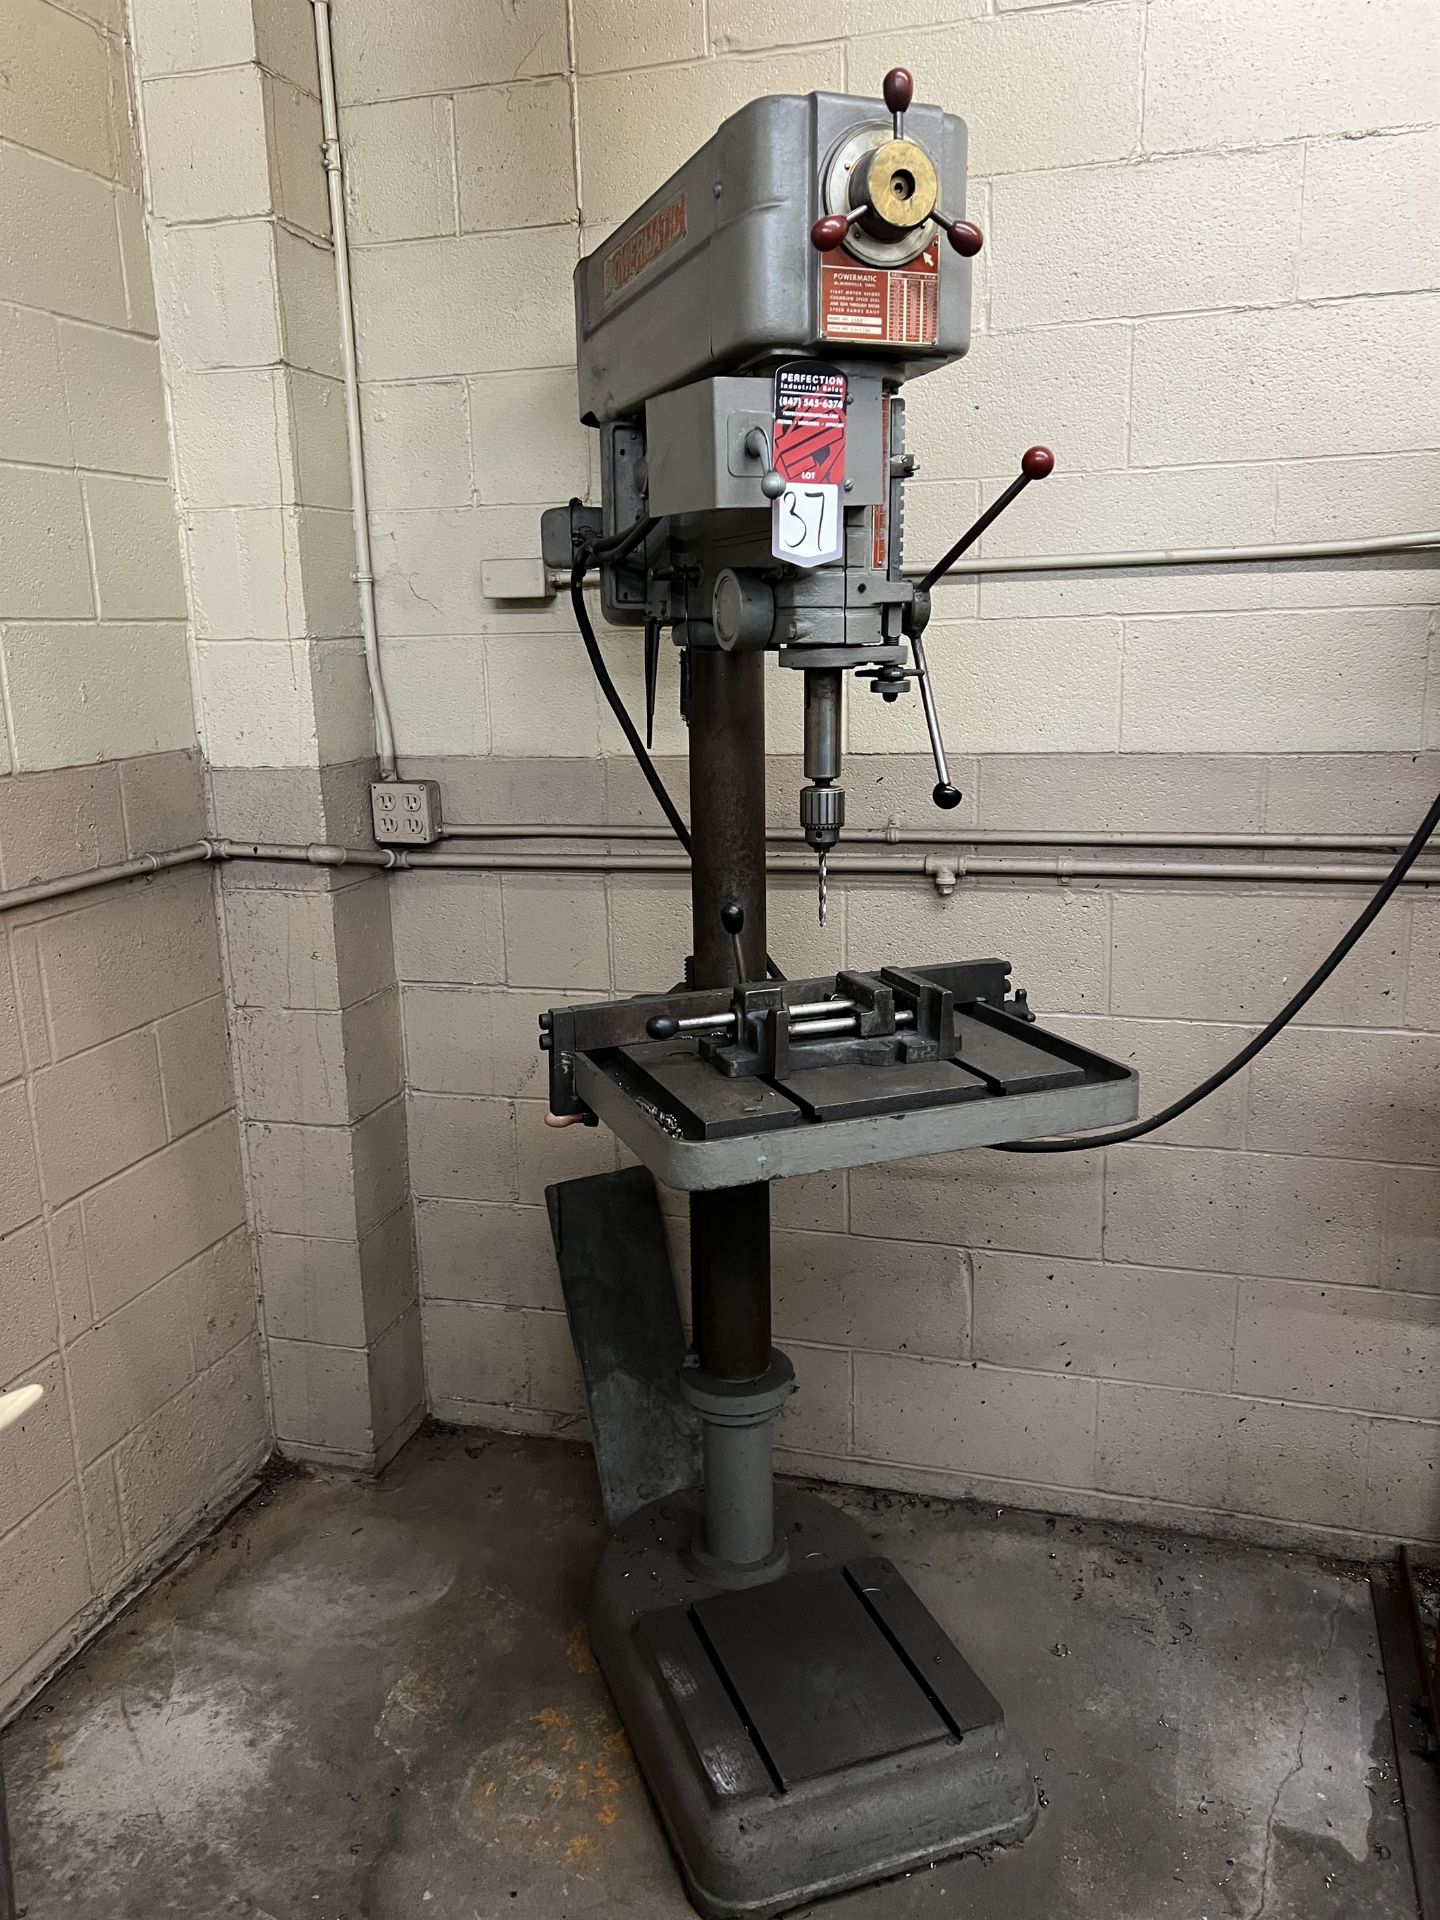 POWERMATIC 1200 Drill Press, s/n 65-6334, 18" x 15-1/2" Table, 300-2000 RPM (This lot is located